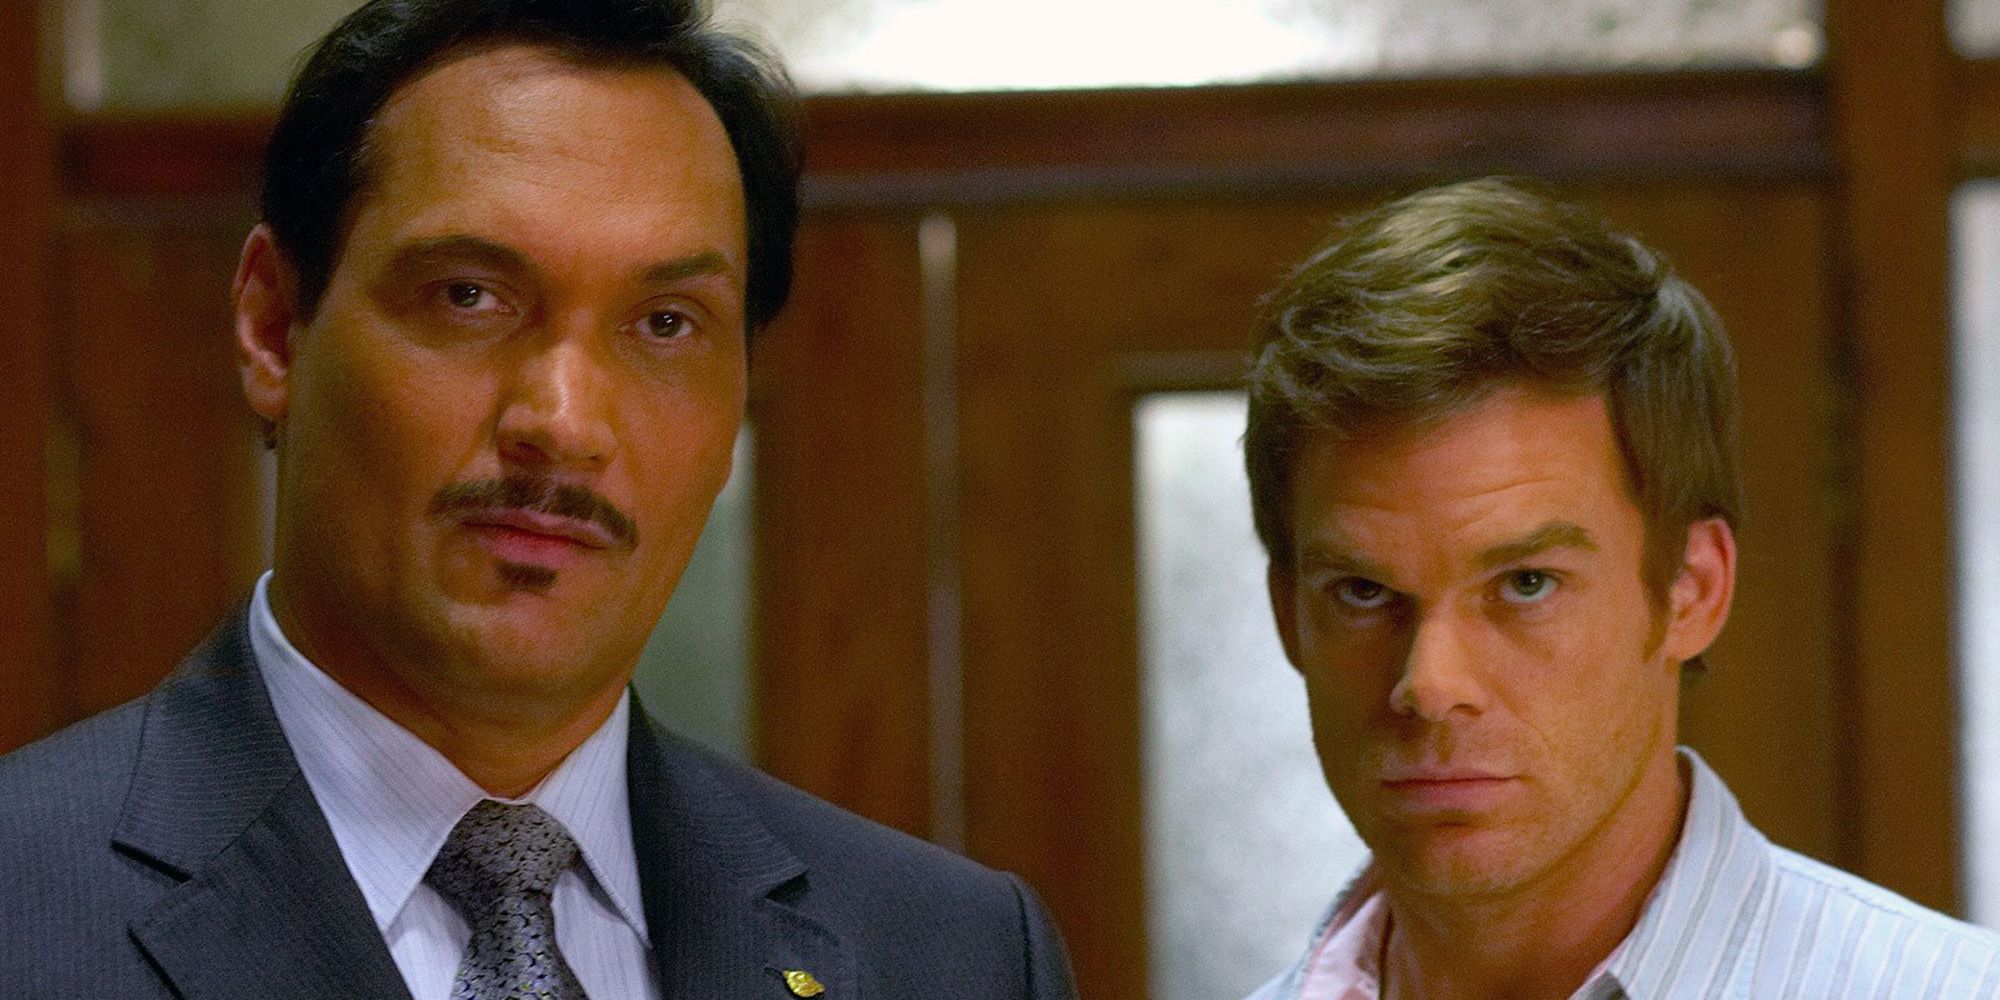 Miguel Prado (Jimmy Smits) & Dexter Morgan (Michael C Hall) became close friends, but their friendship was short lived